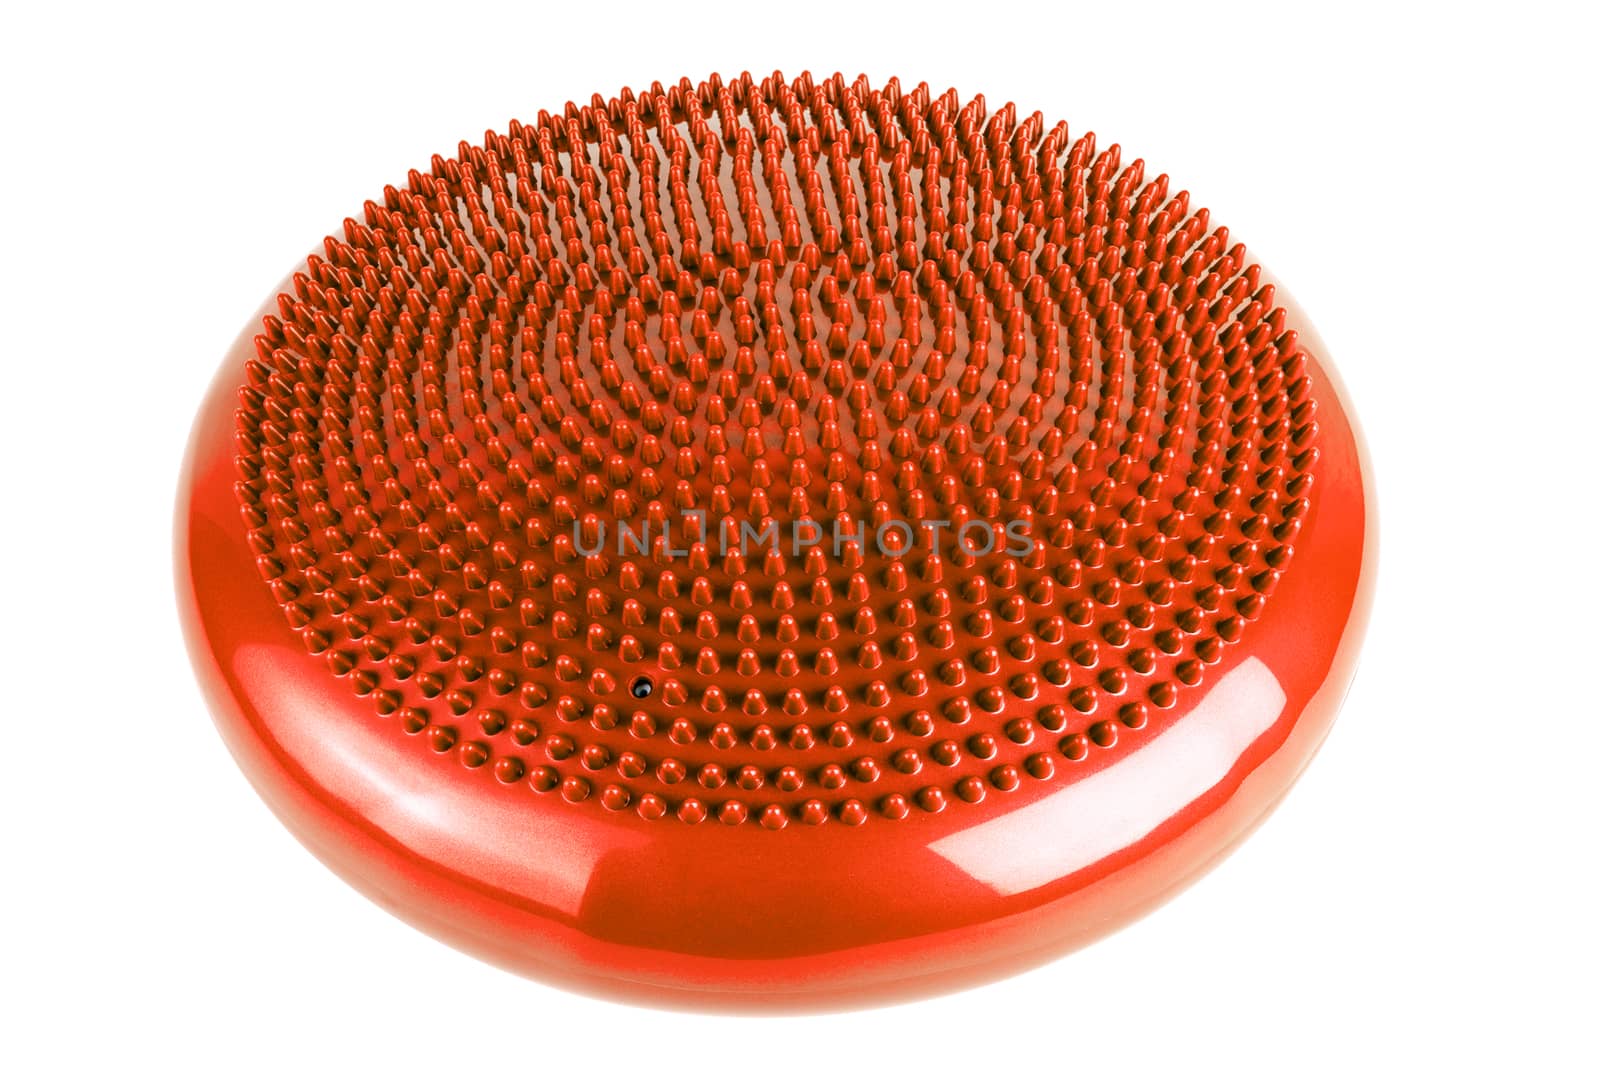 orange inflatable balance disk isoleated on white background, It is also known as a stability disc, wobble disc, and balance cushion. by z1b